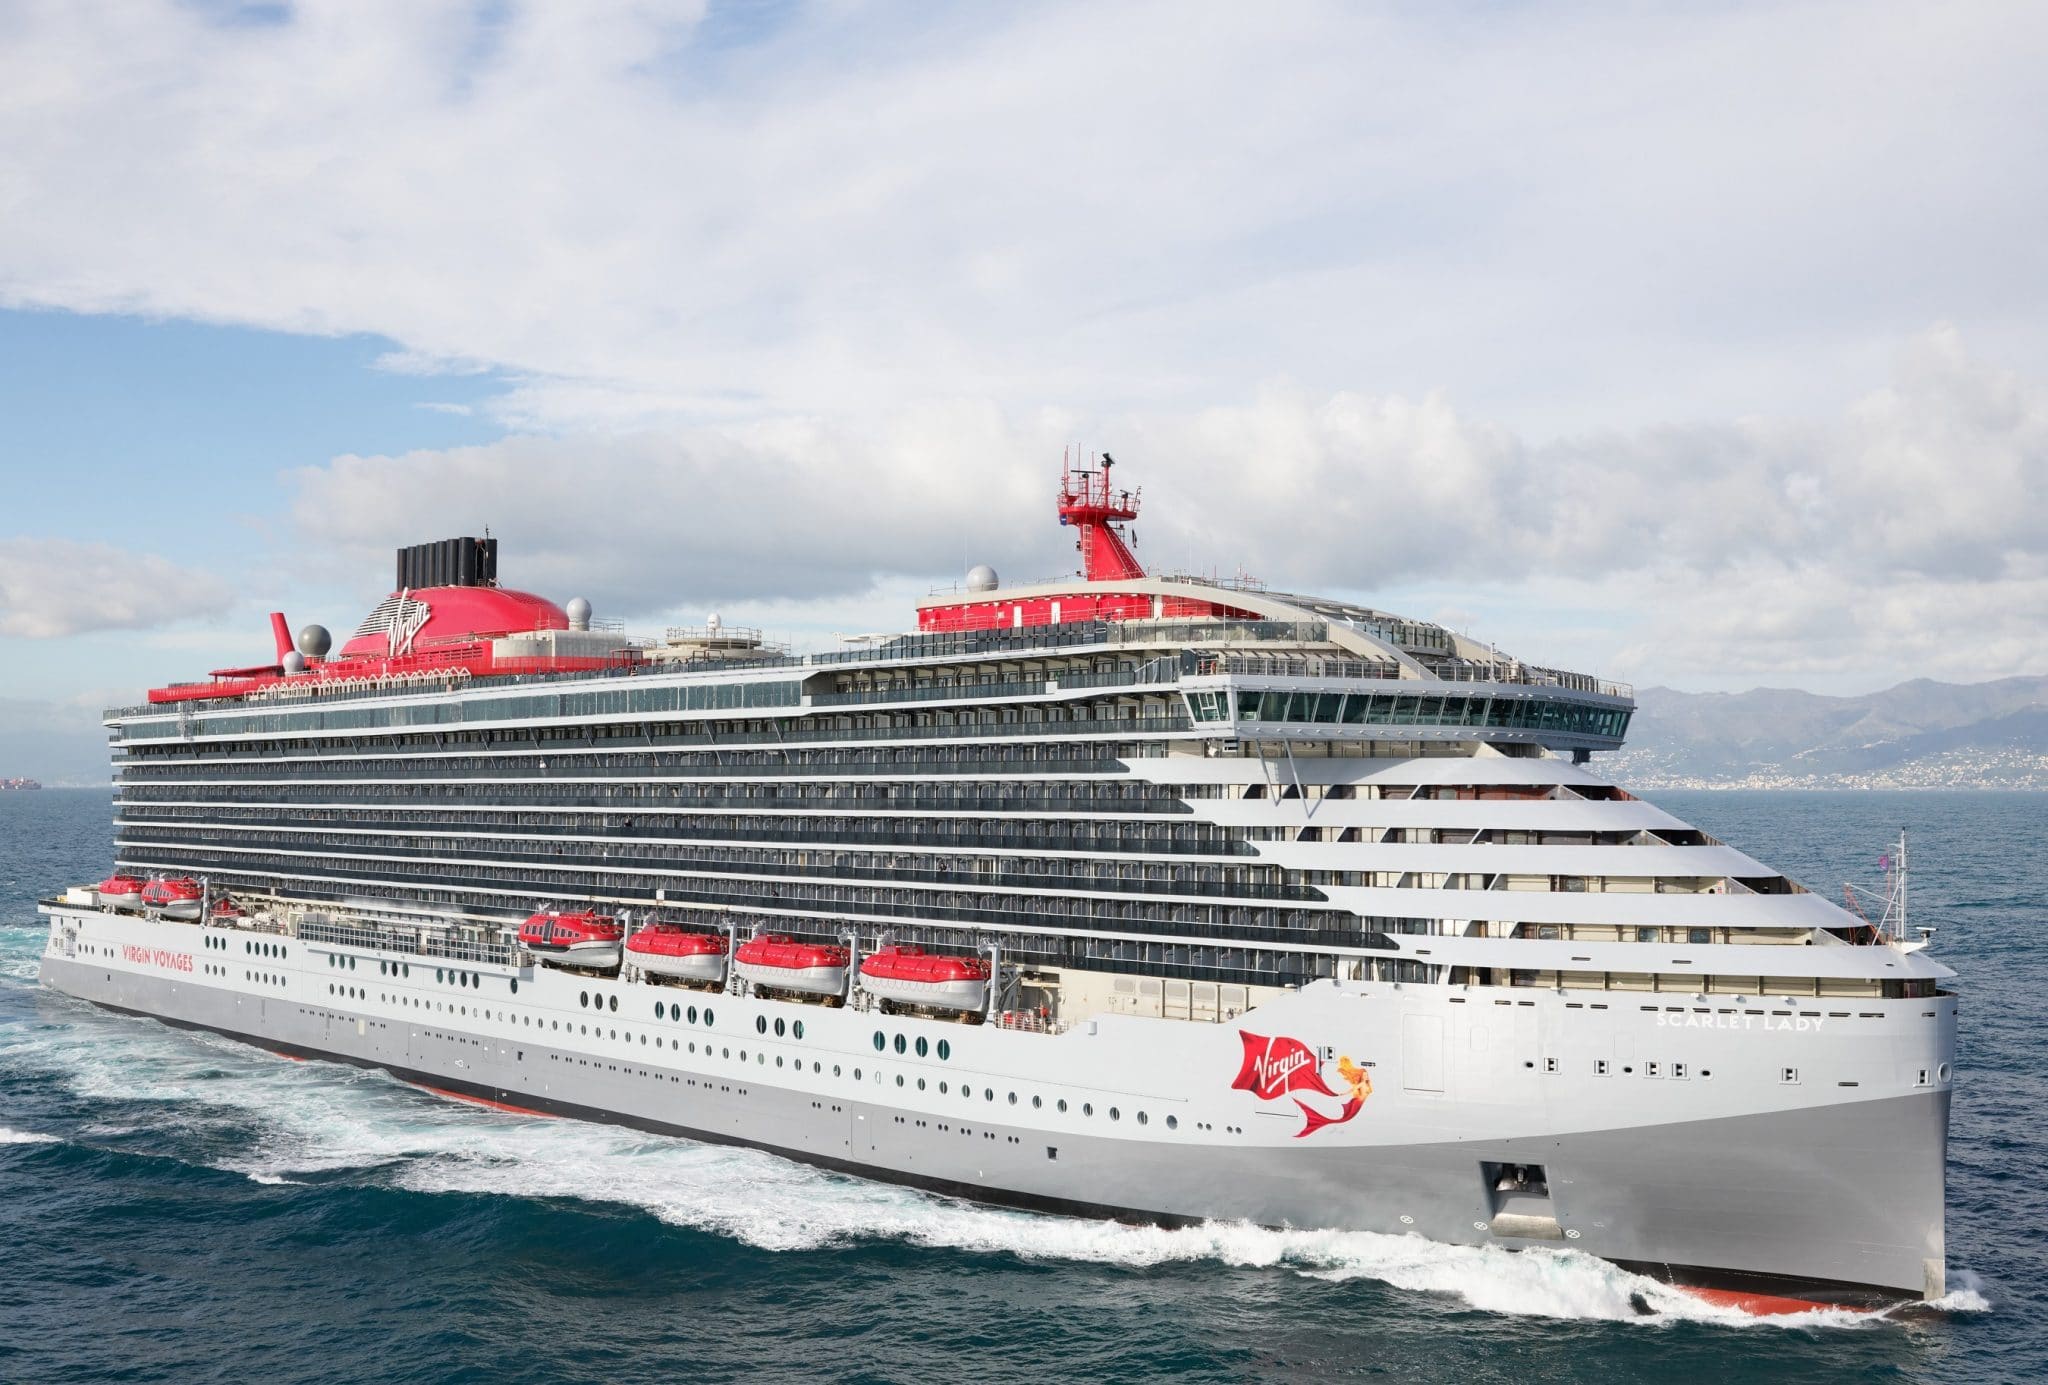 Virgin's First Adults Only Cruise Ship Arrives in Miami